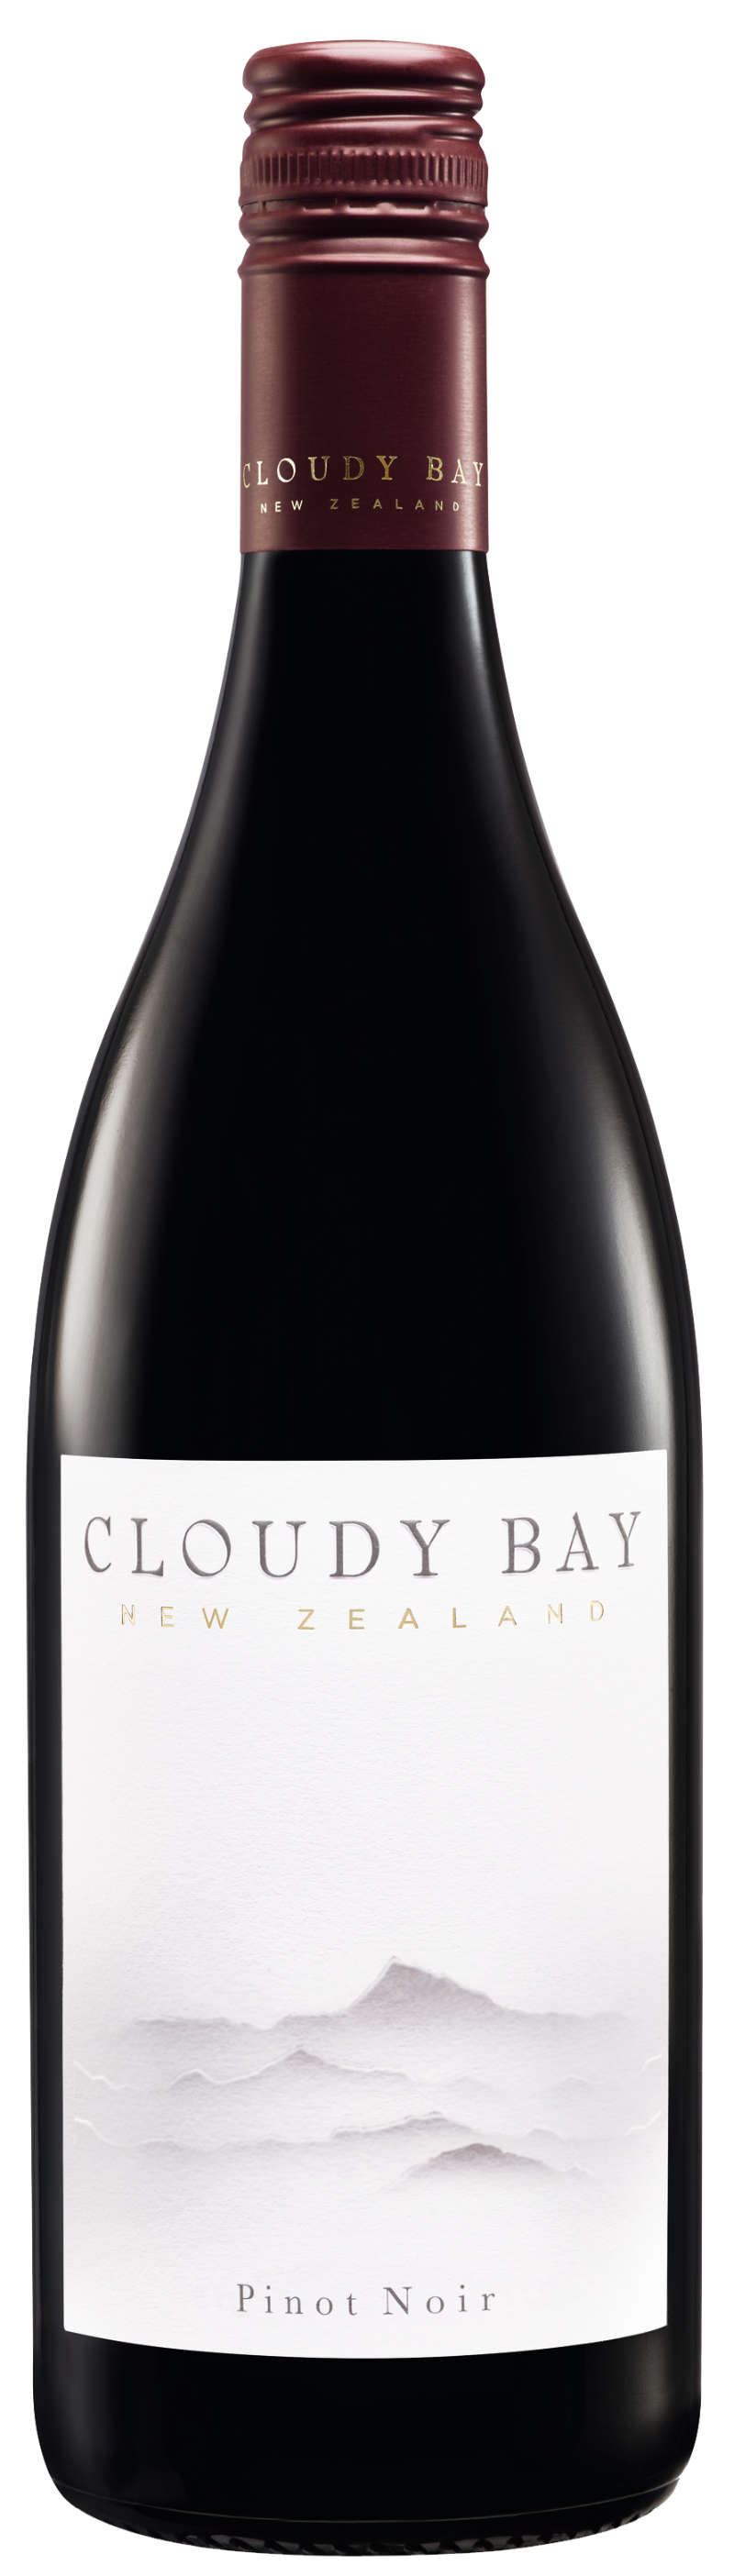 cloudy bay red wine